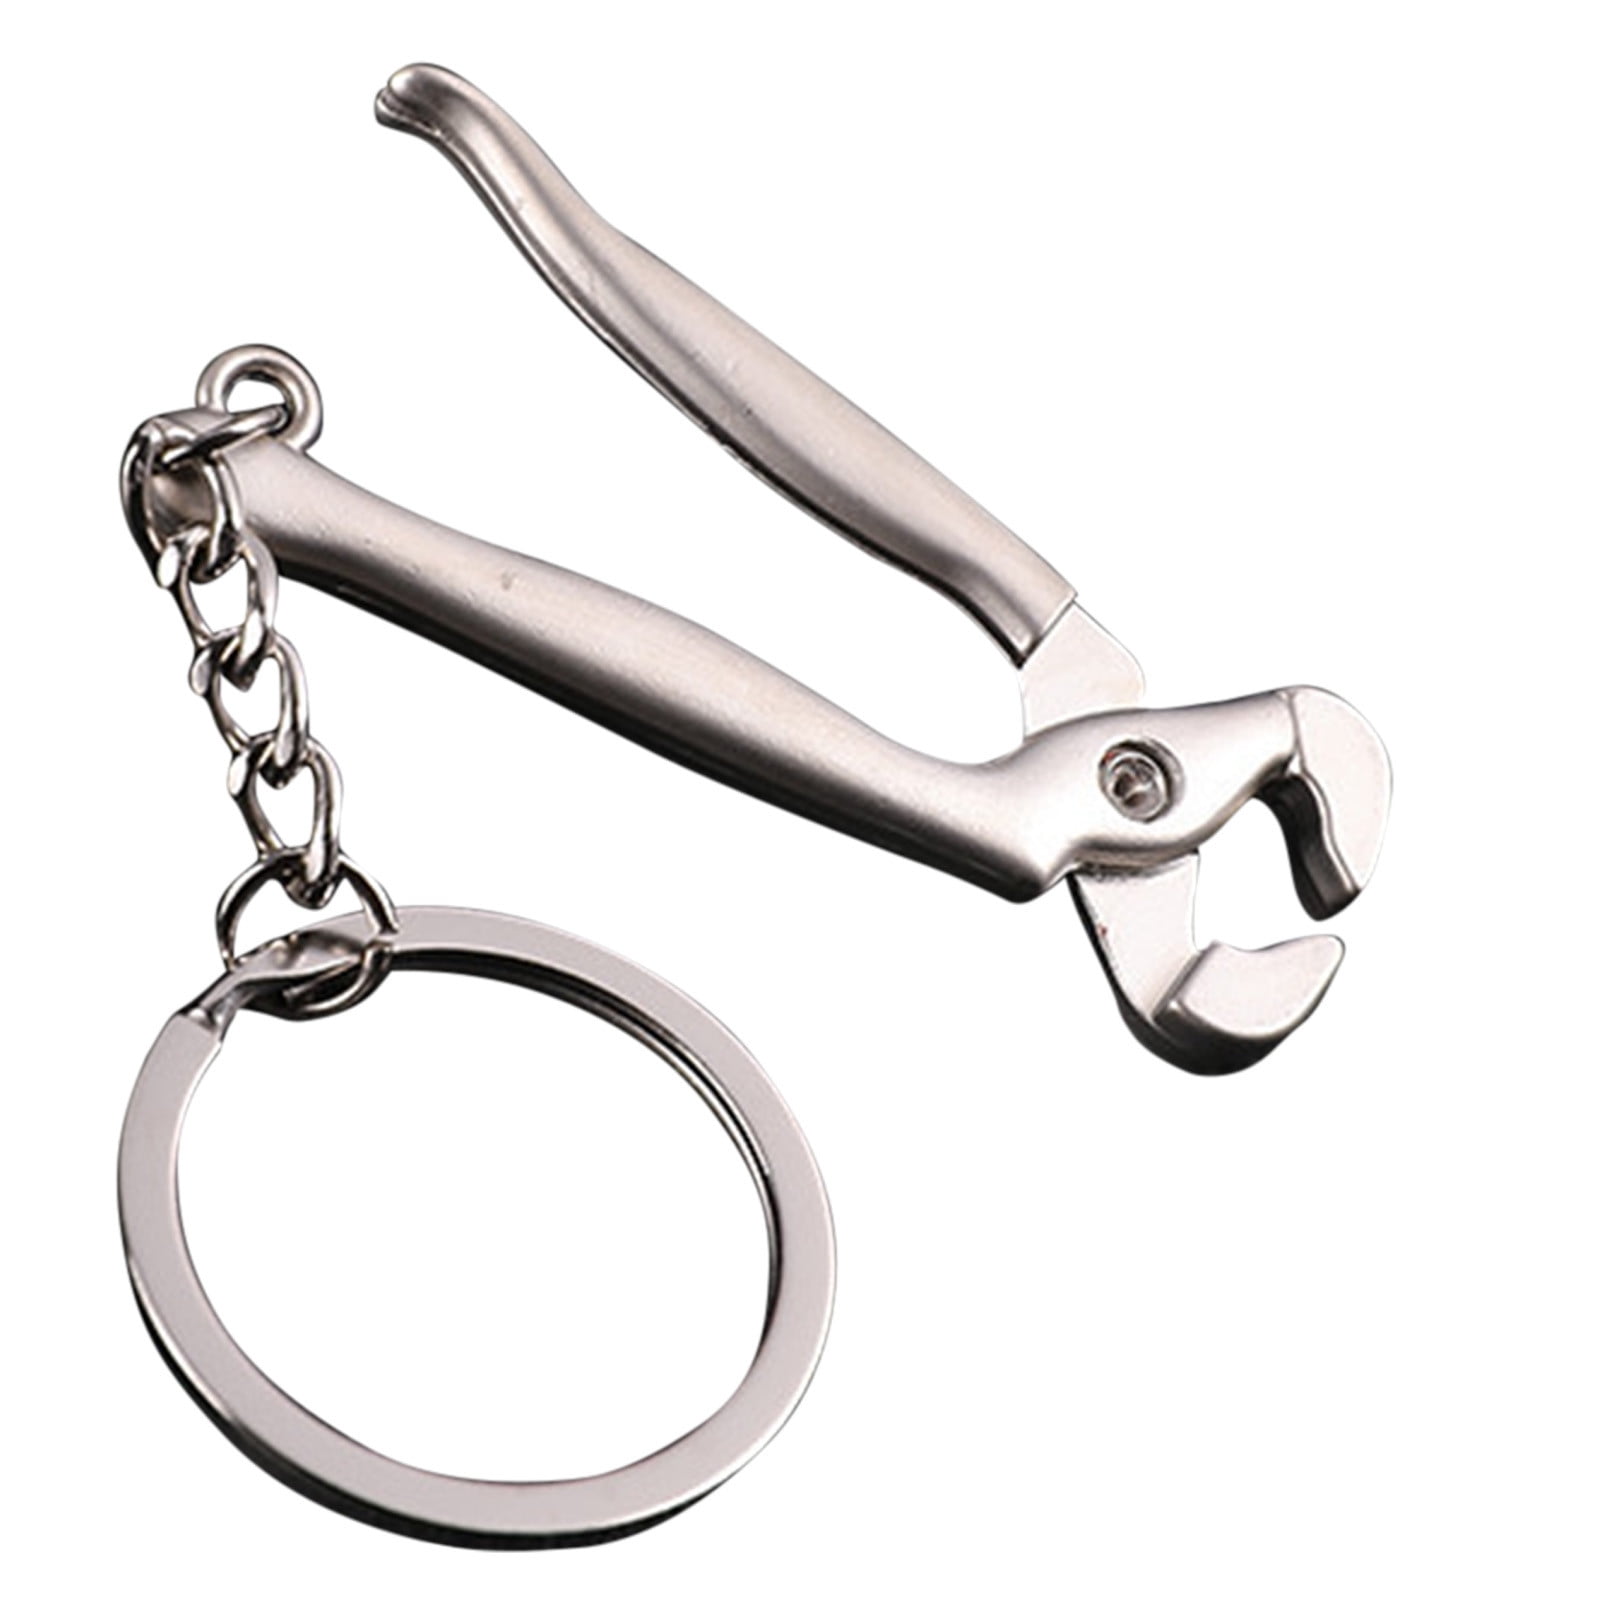 Creative Tool Wrench Spanner Key Chain Keyring Metal Adjustable Keychain lovely 